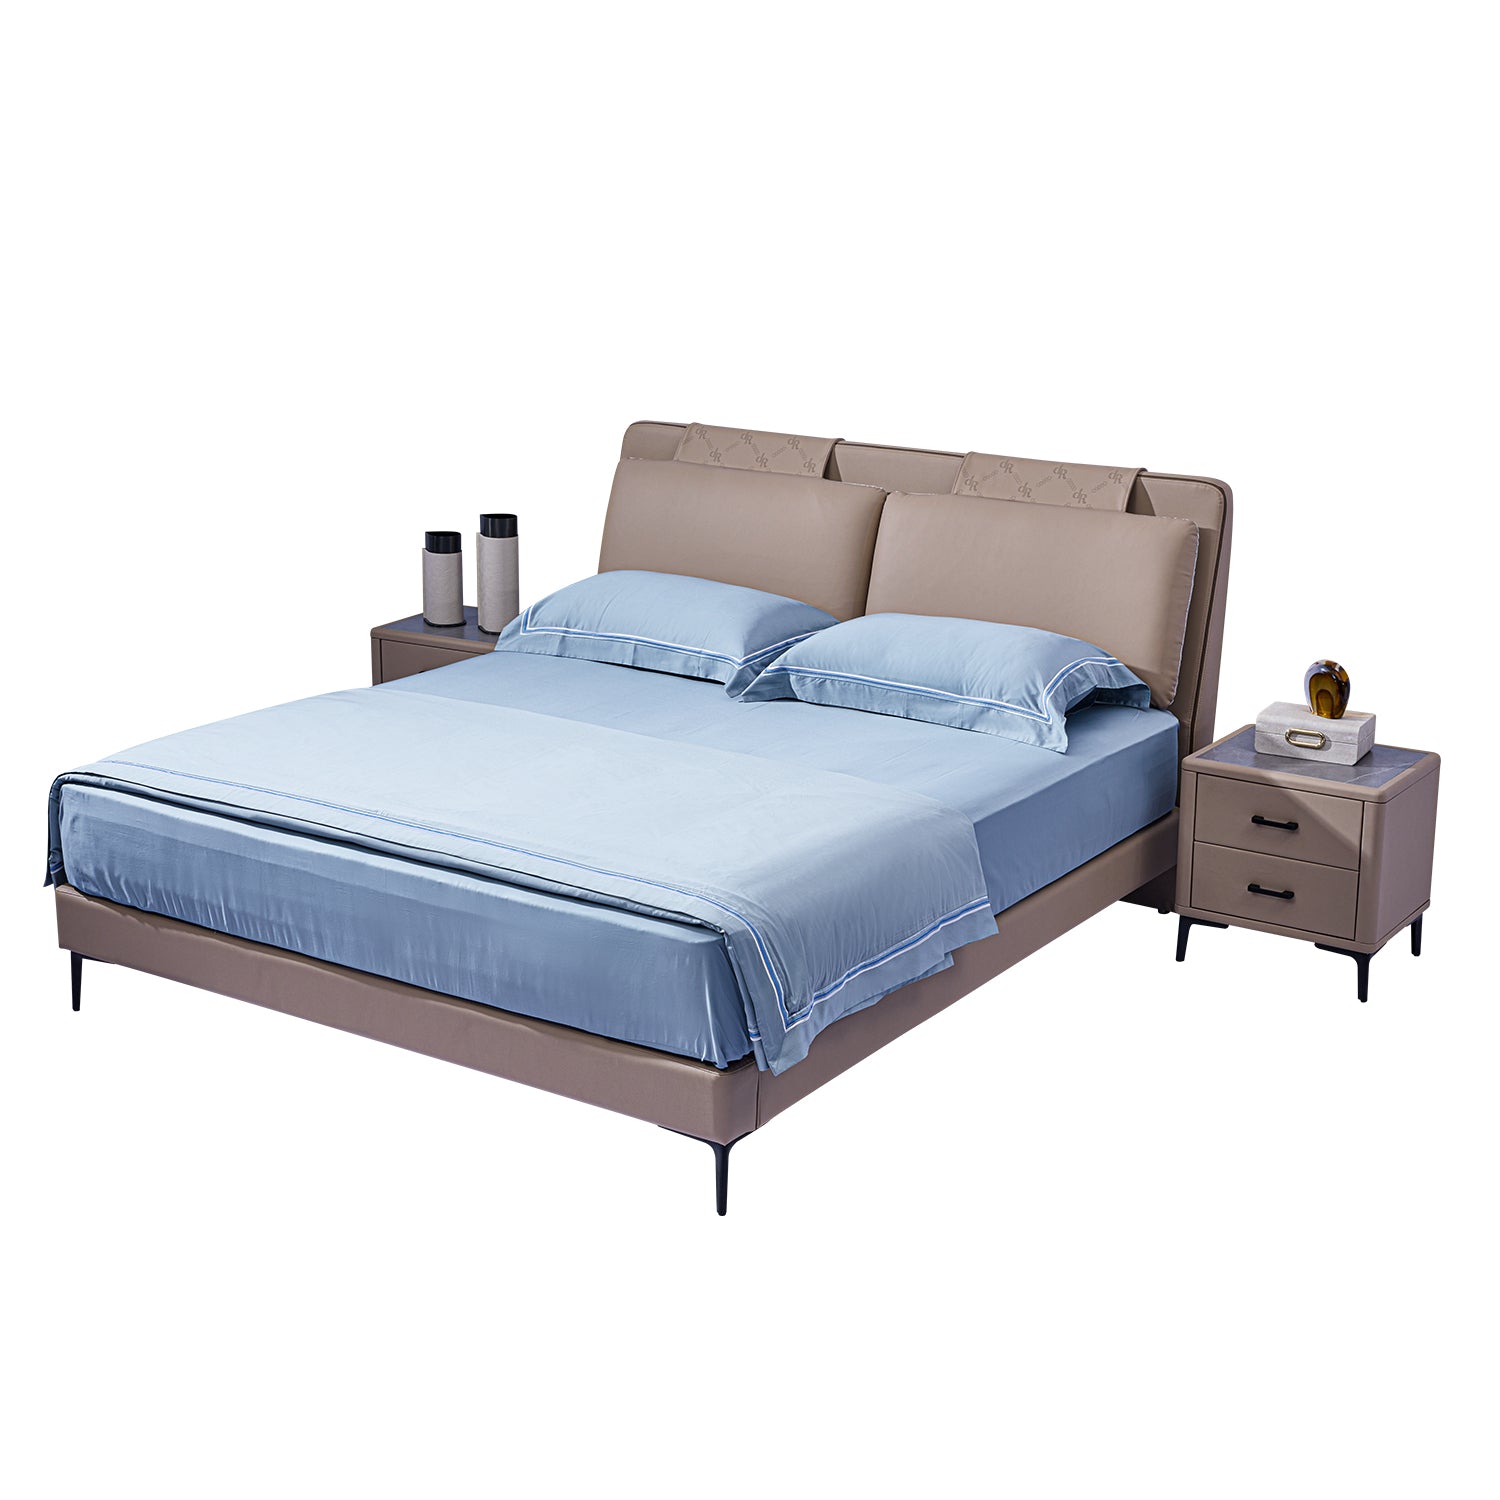 DeRUCCI Bed Frame BOC1 - 006 with beige leather headboard and light blue beddings, accompanied by nightstands on both sides adorned with books, a golden ball ornament, and thermos flasks.